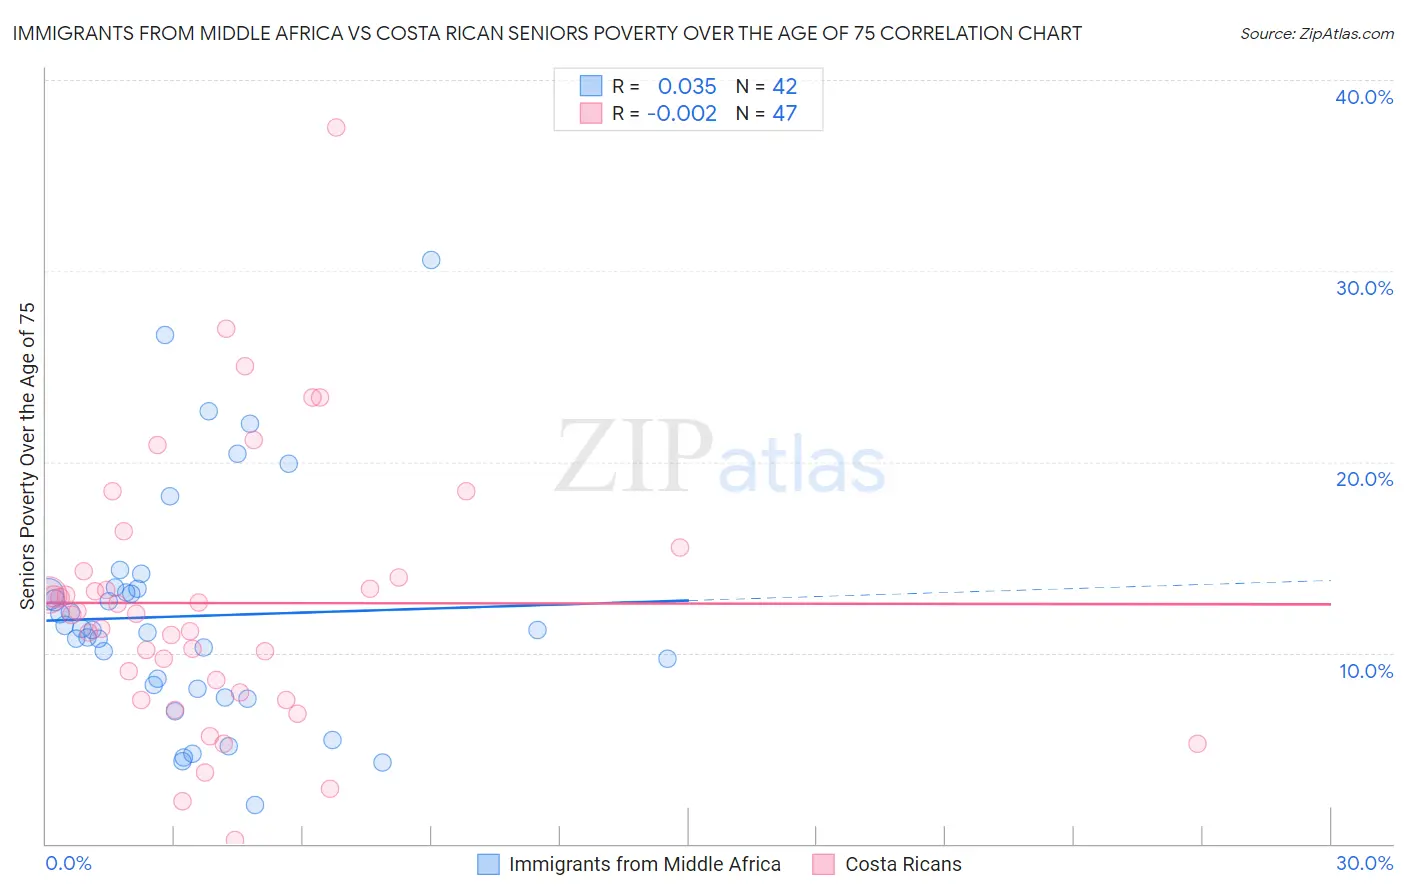 Immigrants from Middle Africa vs Costa Rican Seniors Poverty Over the Age of 75